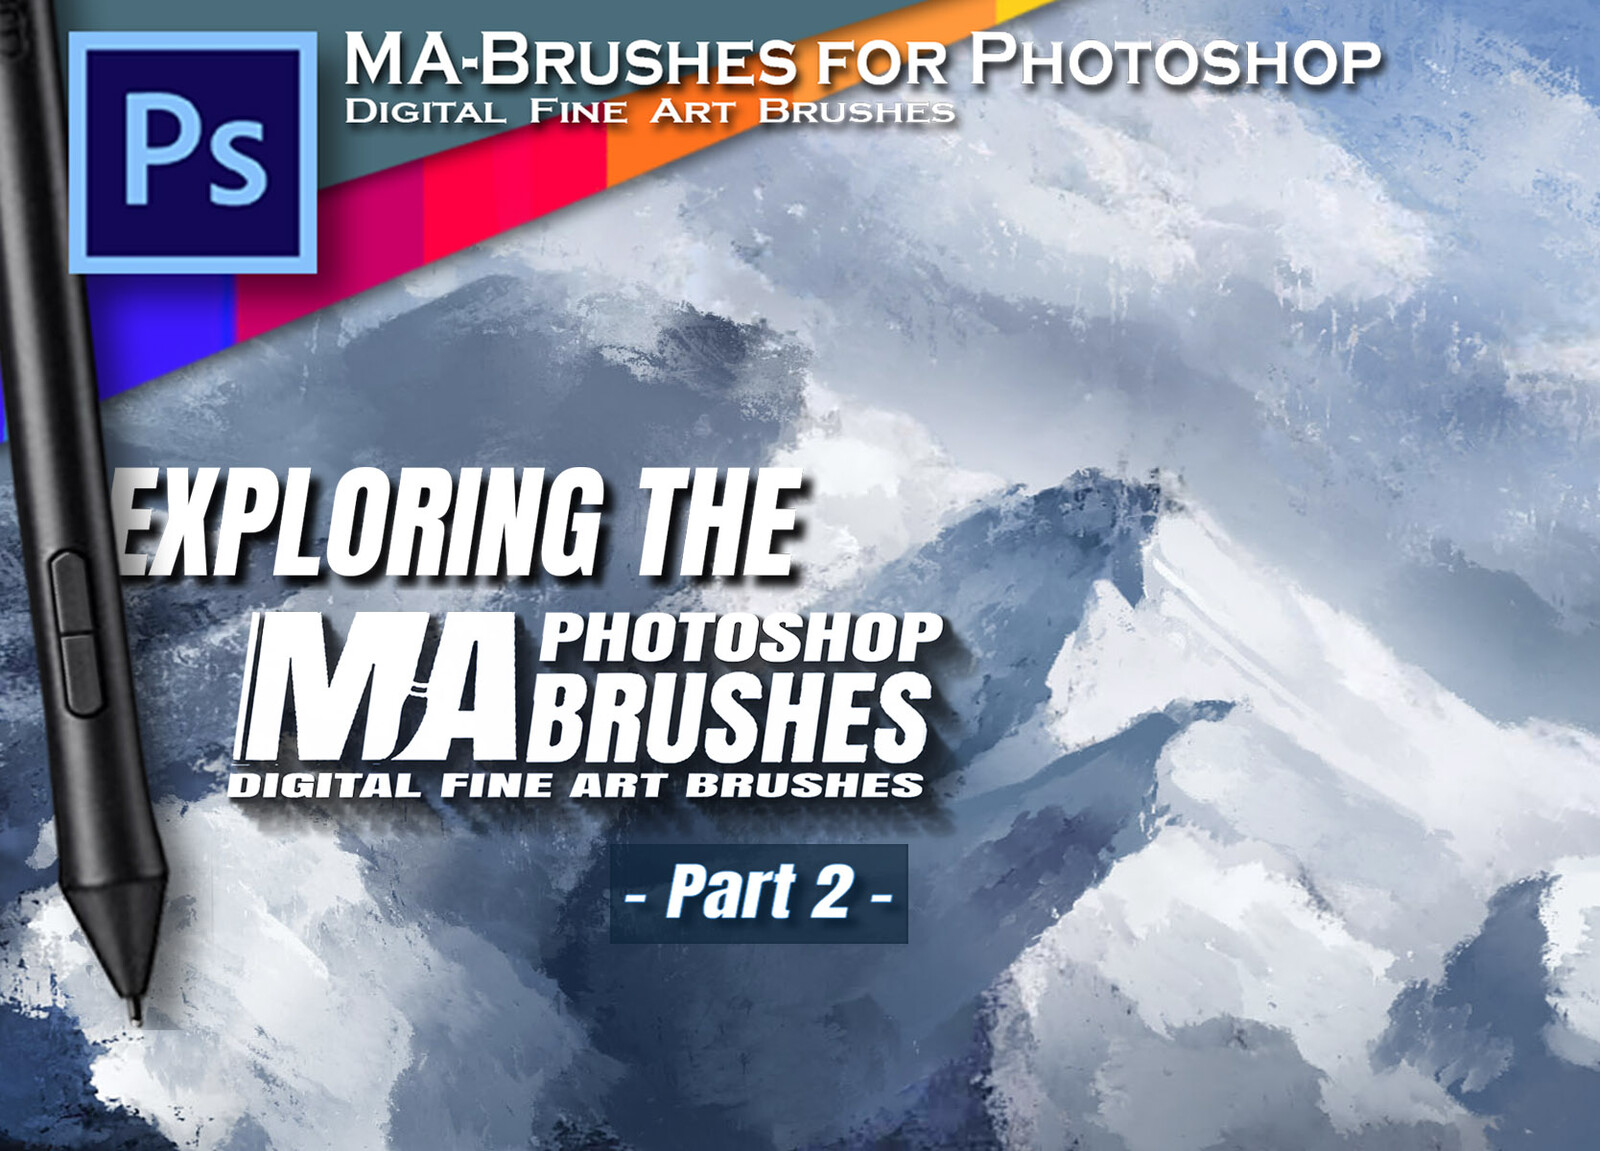 Exploring the MA-Brushes - Digital OIL Brushes for Photoshop -PART 2 !